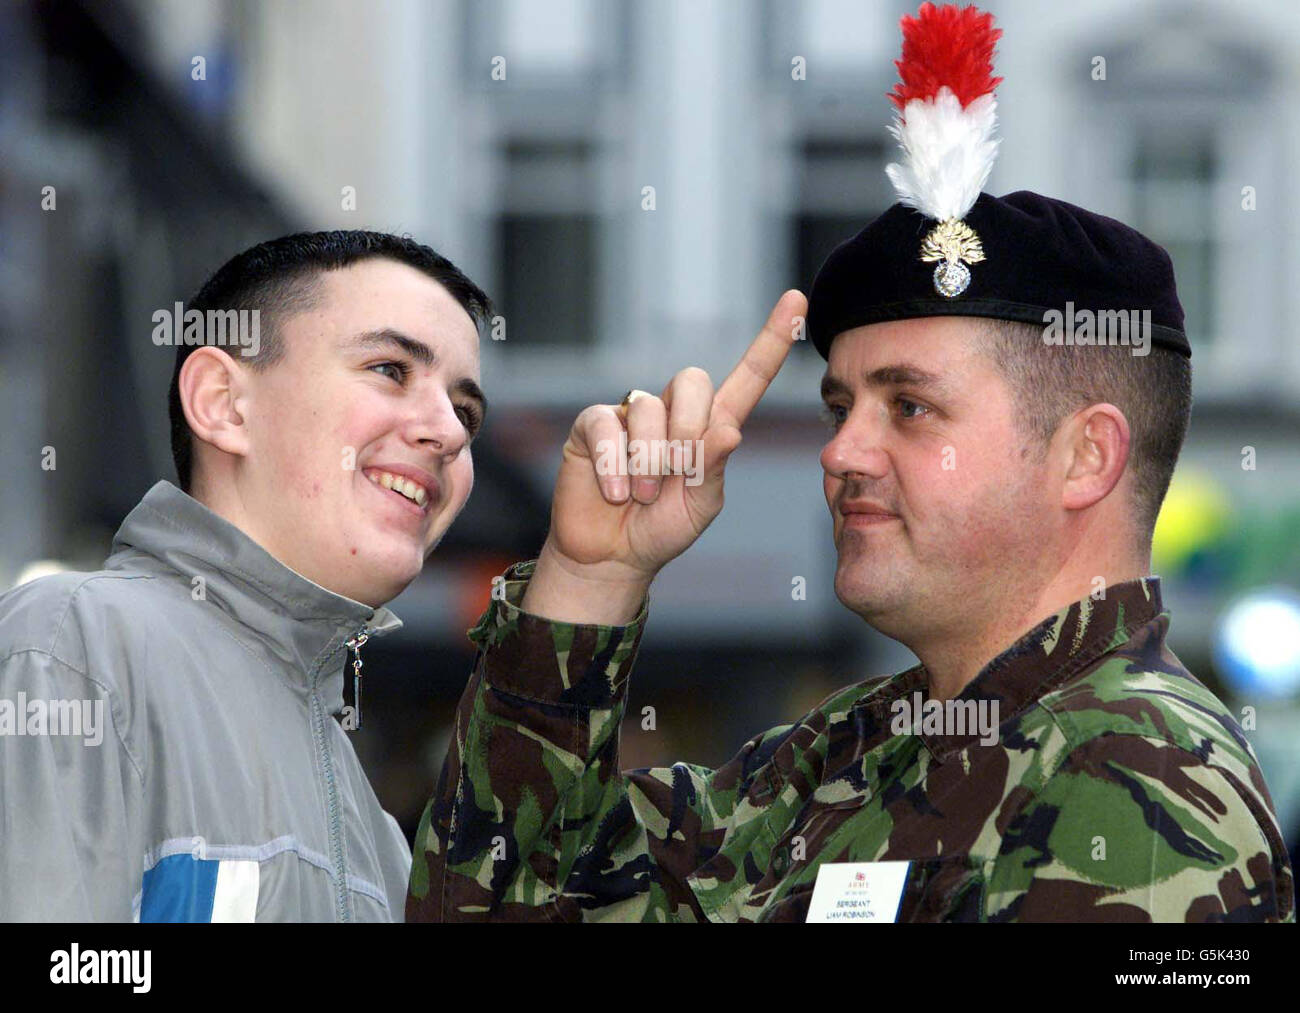 Actor from the film 'Billy Elliot' Stuart Wells, 19 (left) poses with Recruiting Officer Sergeant Liam Robinson of the 1st Battalion Royal Regiment Of Fusiliers in Newcastle, after deciding to give up his acting career to enlist. * Stuart Wells from Wallsend, North Tyneside who played Billy's best friend Michael in the film about a boy with a passion for ballet, was finally persuaded to enlist by his brother John, 17, who is already serving with the Fusiliers in Germany. He is currently starring in ITV's hit drama Peak Practice and recently returned from three months on location in Spain with Stock Photo